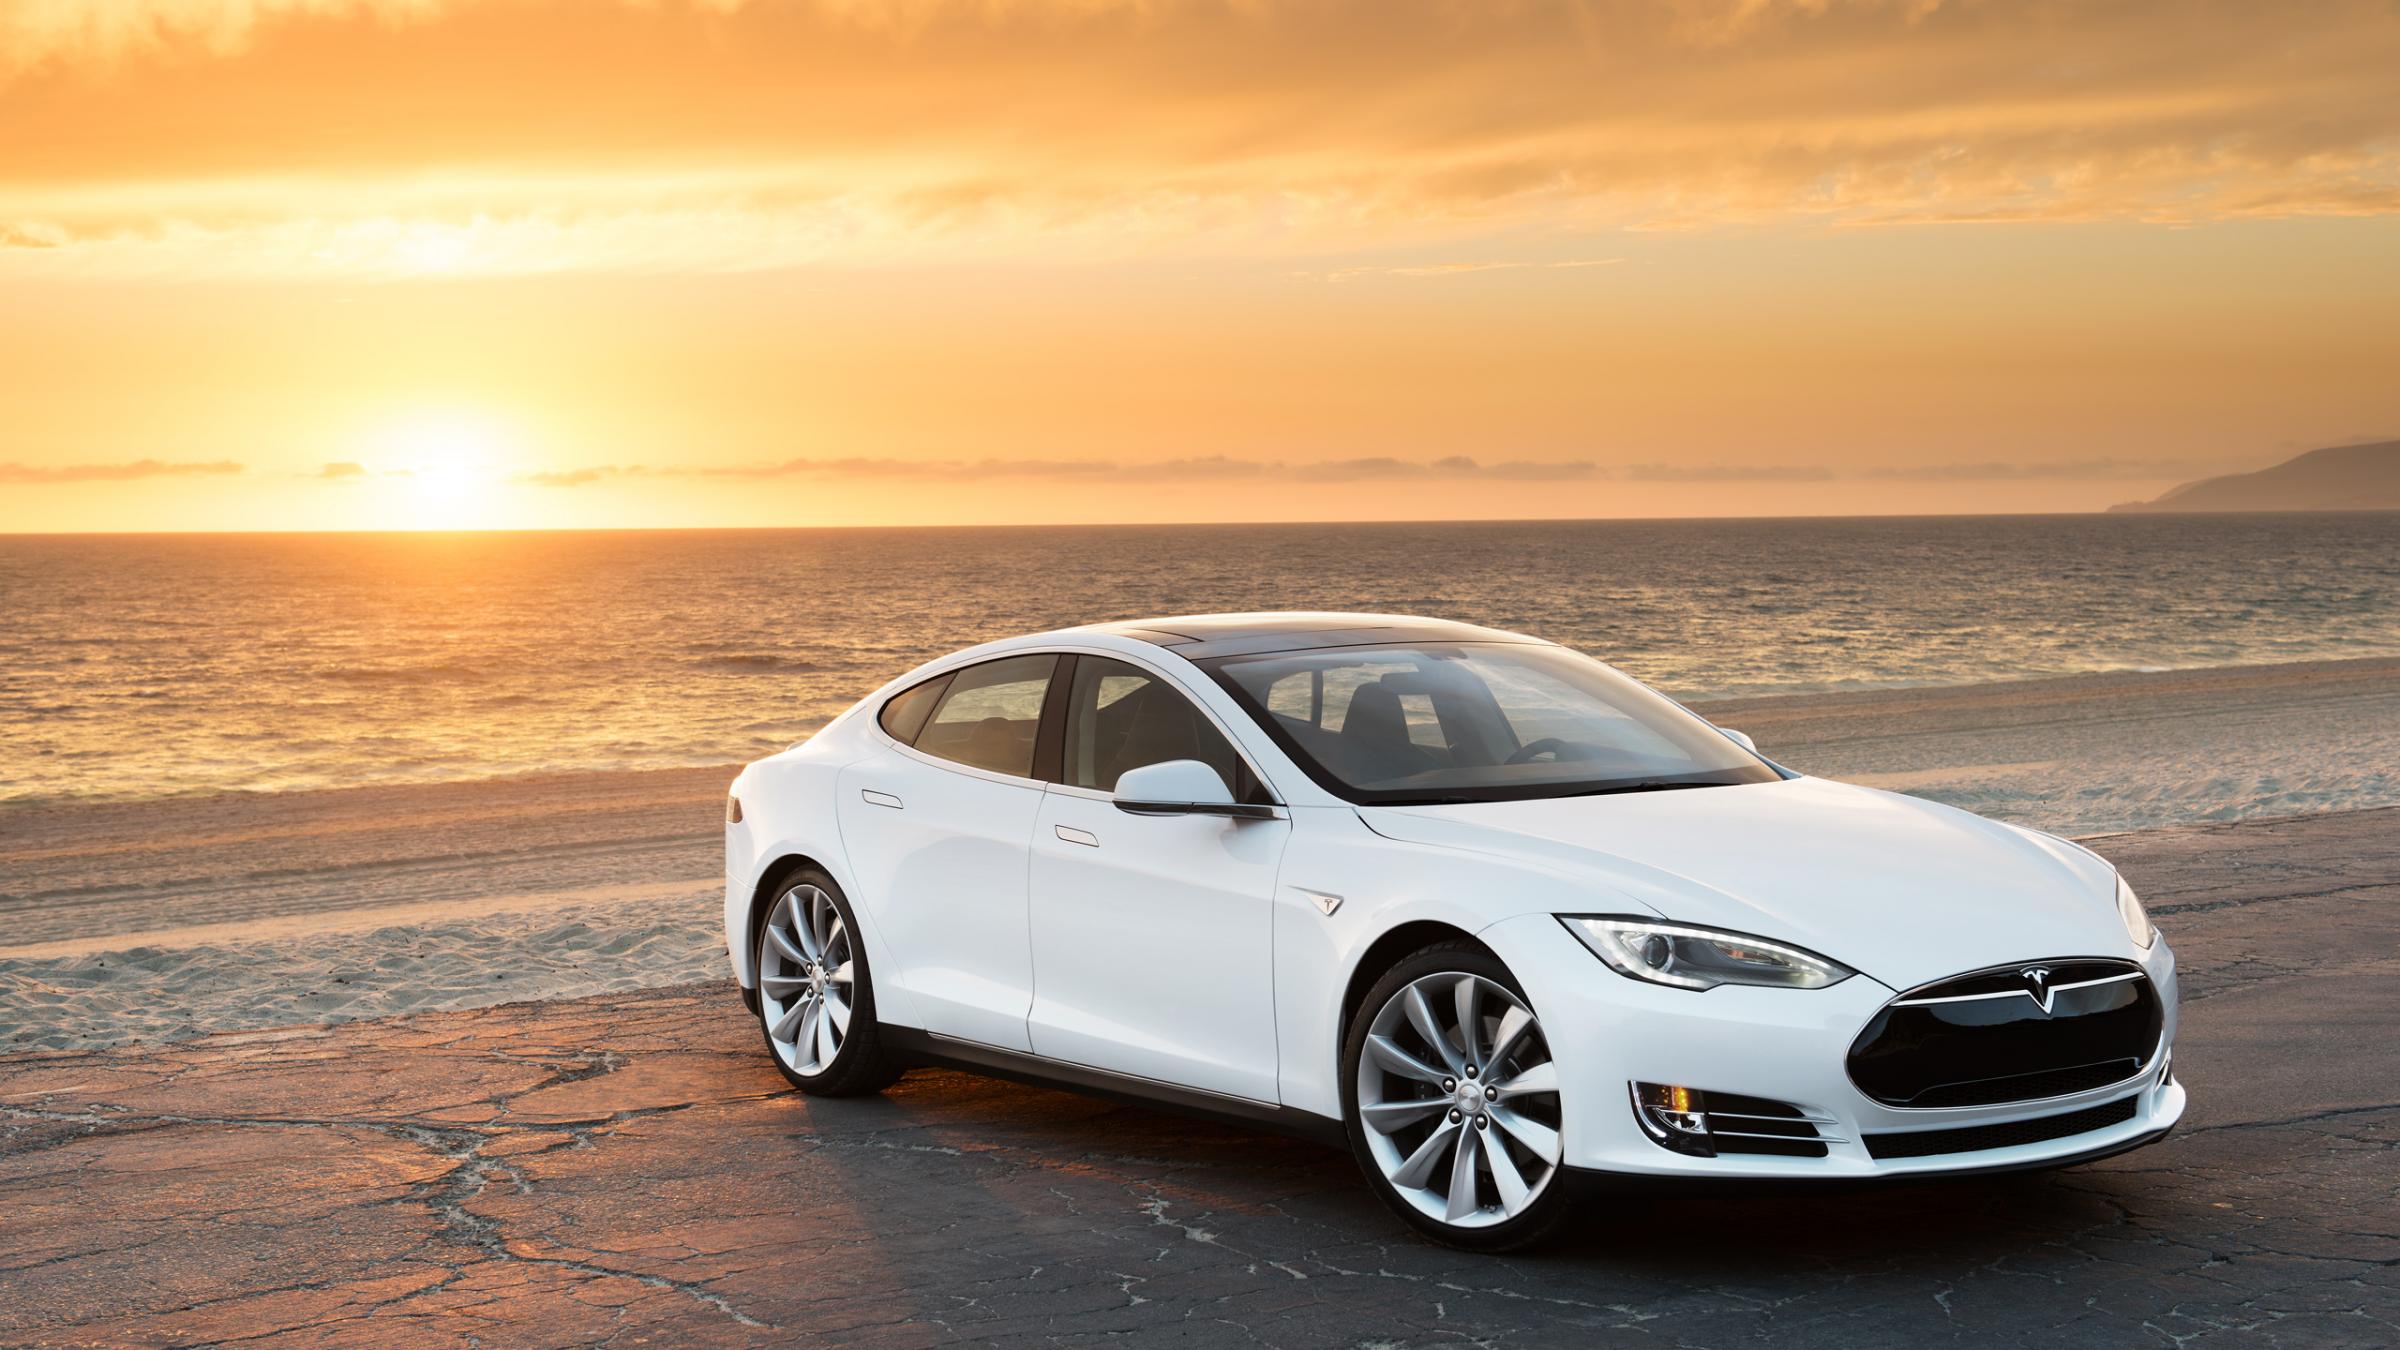 The Tesla Model S electric car. (photo by the company)